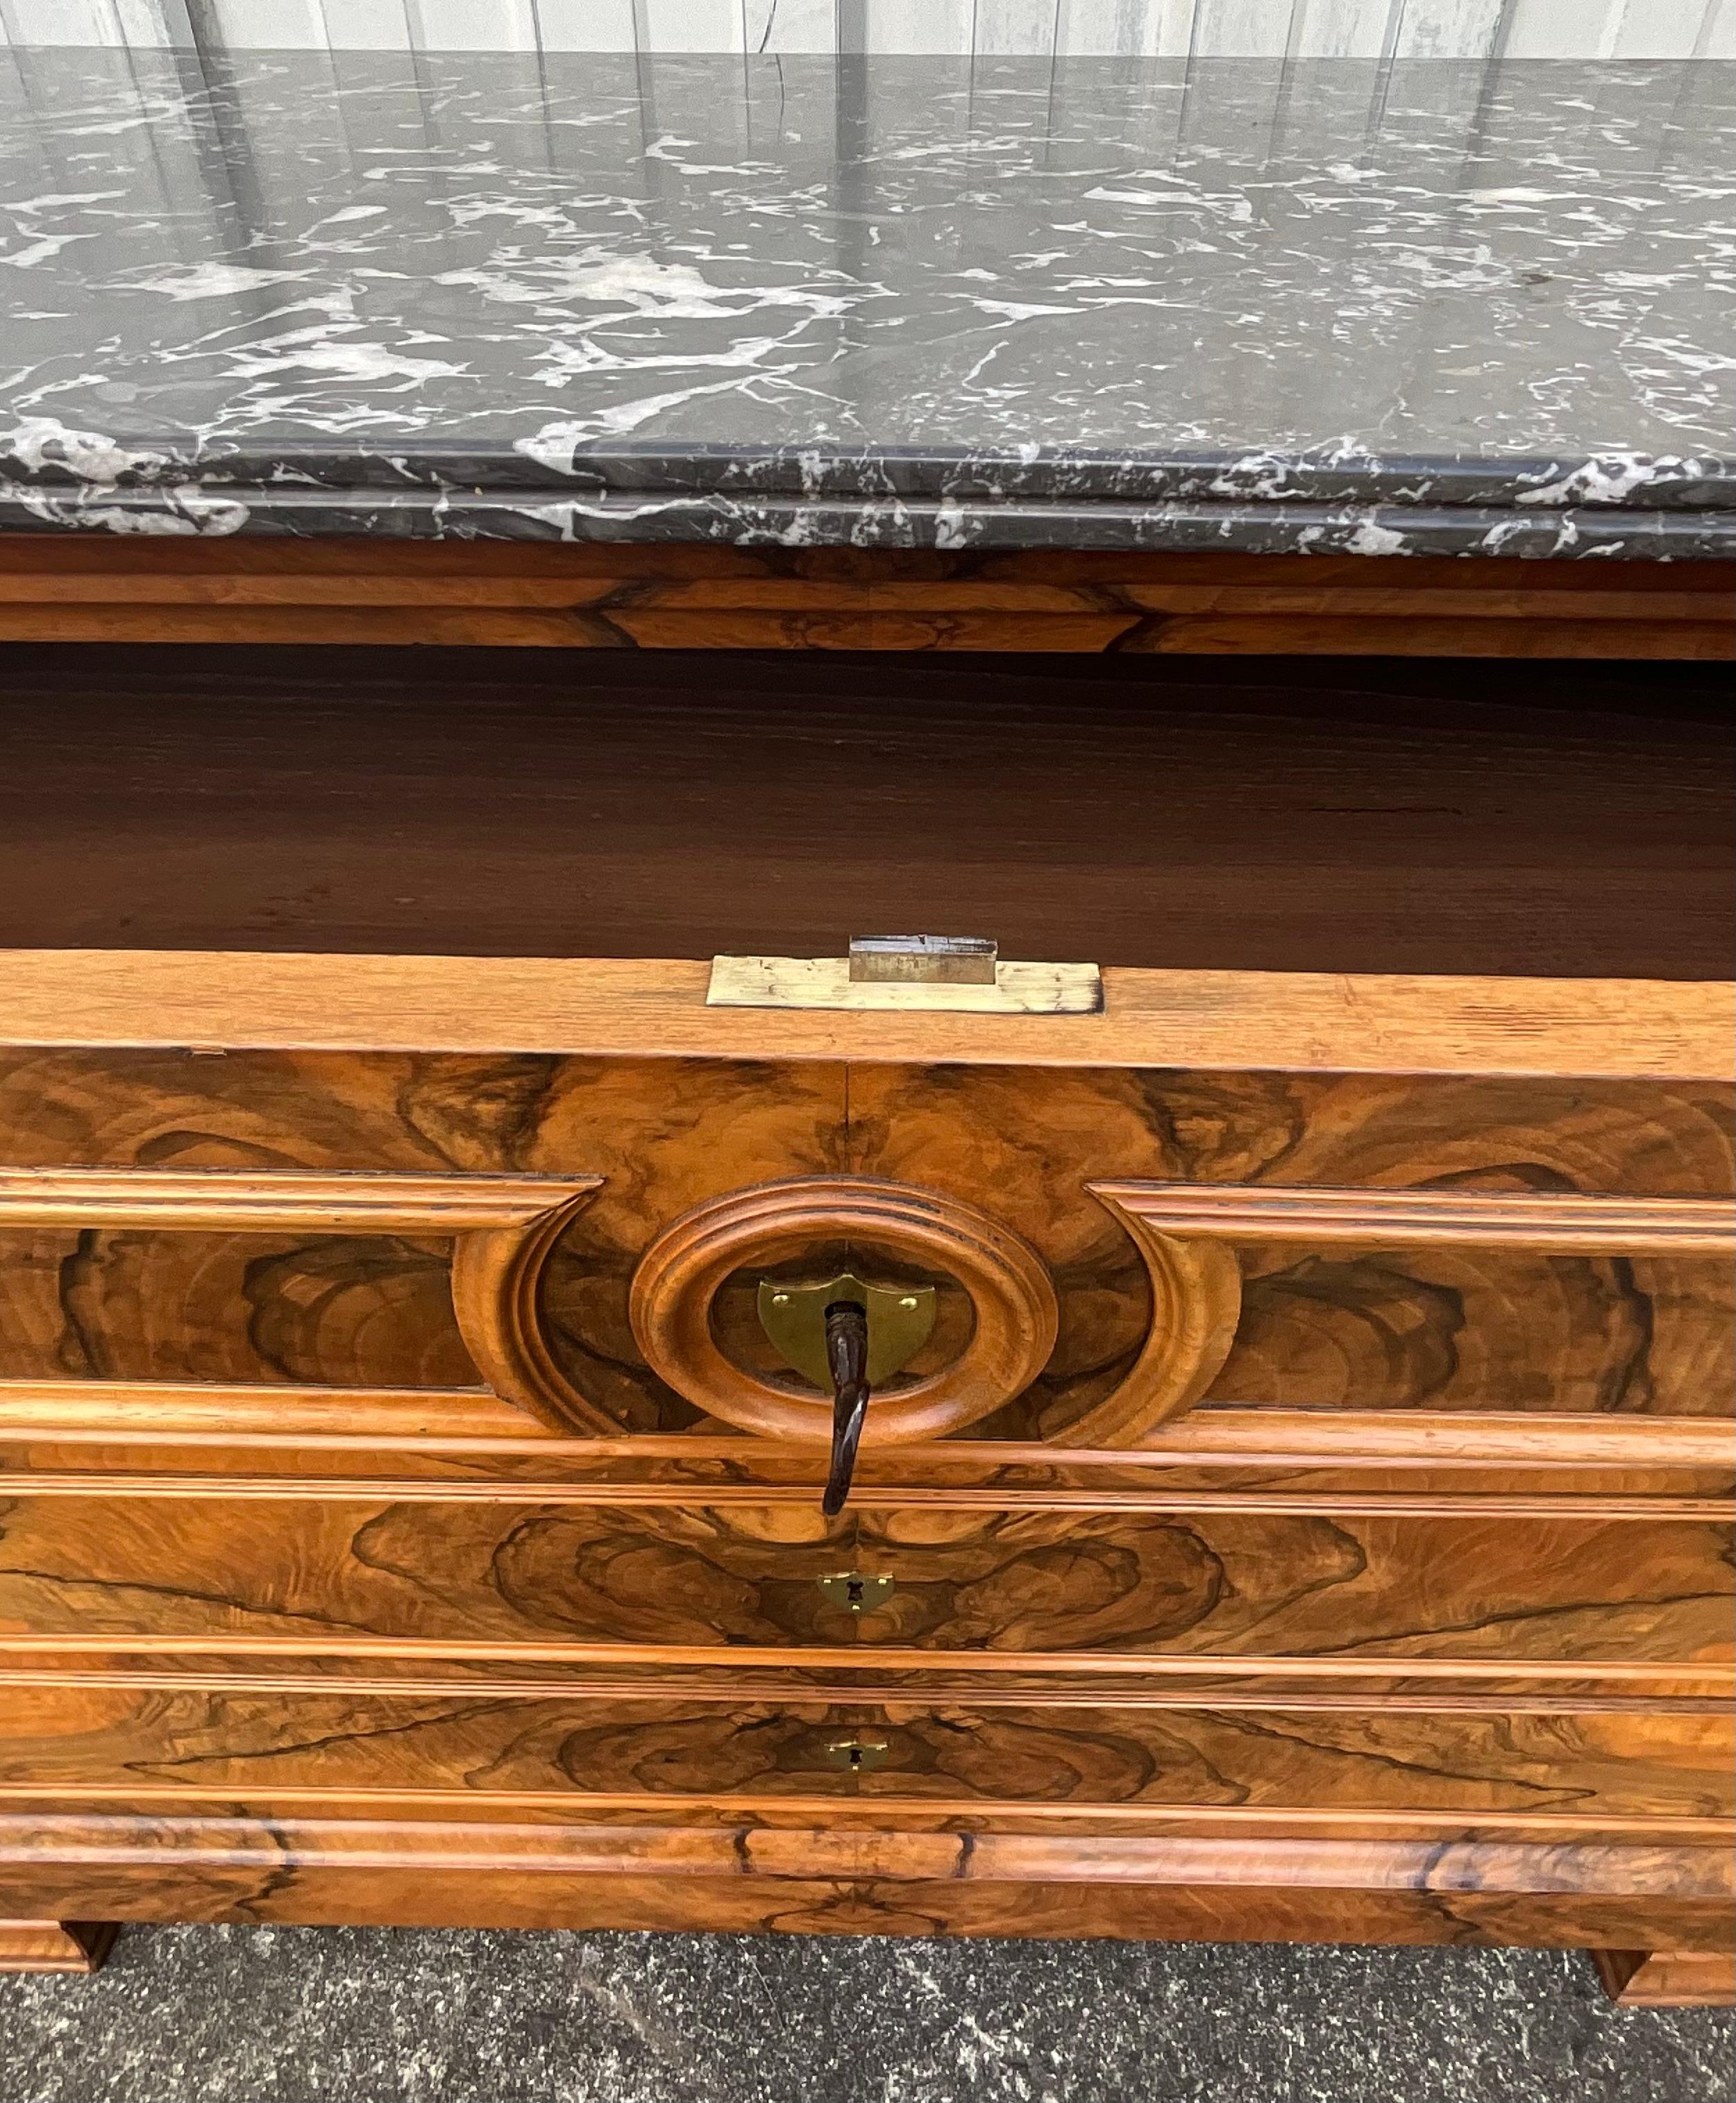 French chest of drawers Louis Philippe late 19th century. The wood is of the bramble of walnut.

Walnut brambles are flamed because they have many aesthetic designs. These drawings have complex, highly contrasting patterns and intricate veins on a